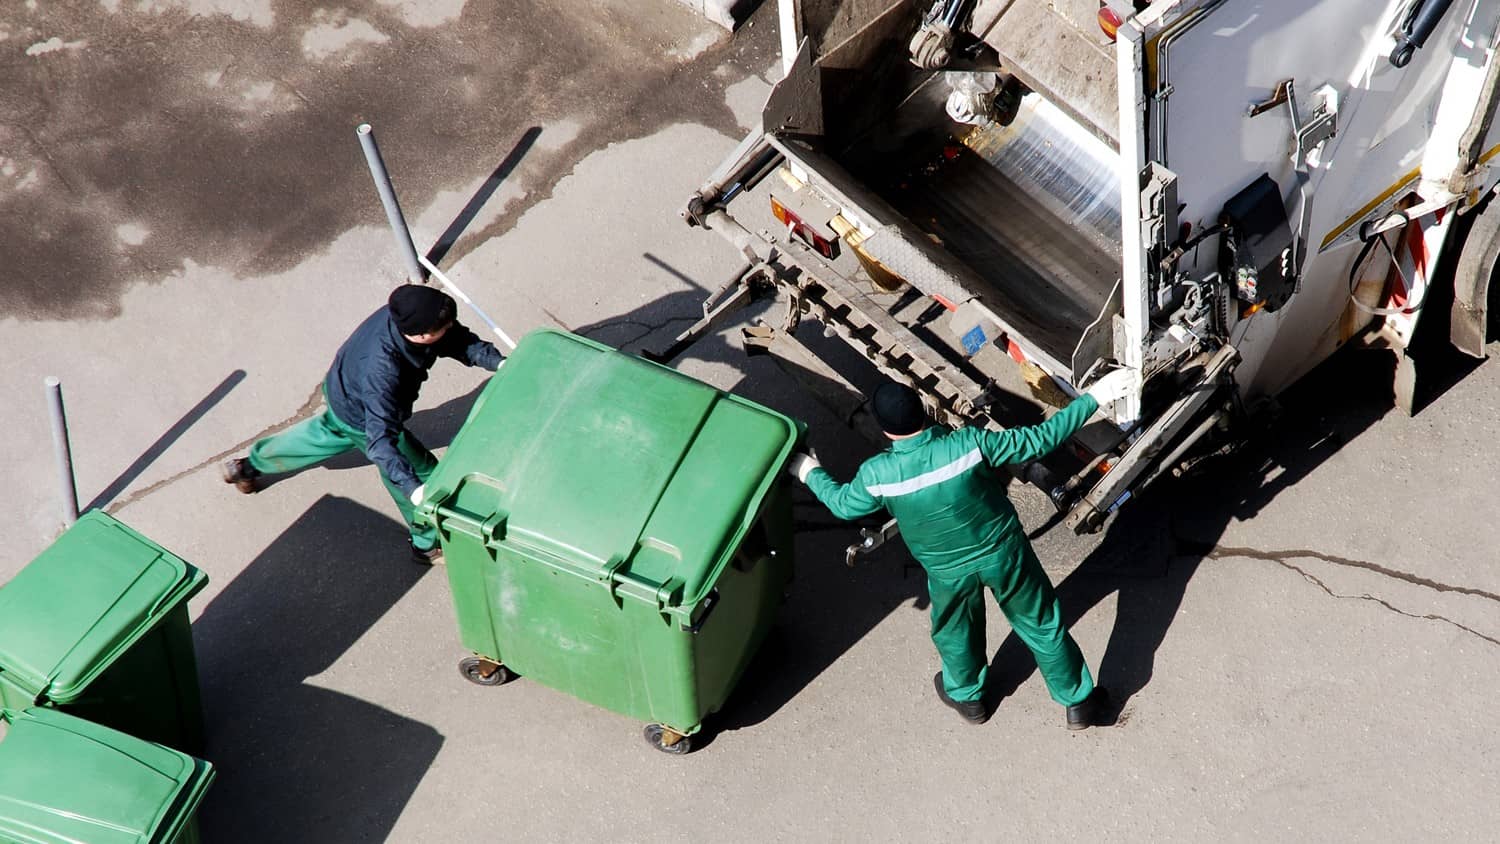 A person wearing protective gear collecting waste in to a truck, with garbage bins in the foreground.